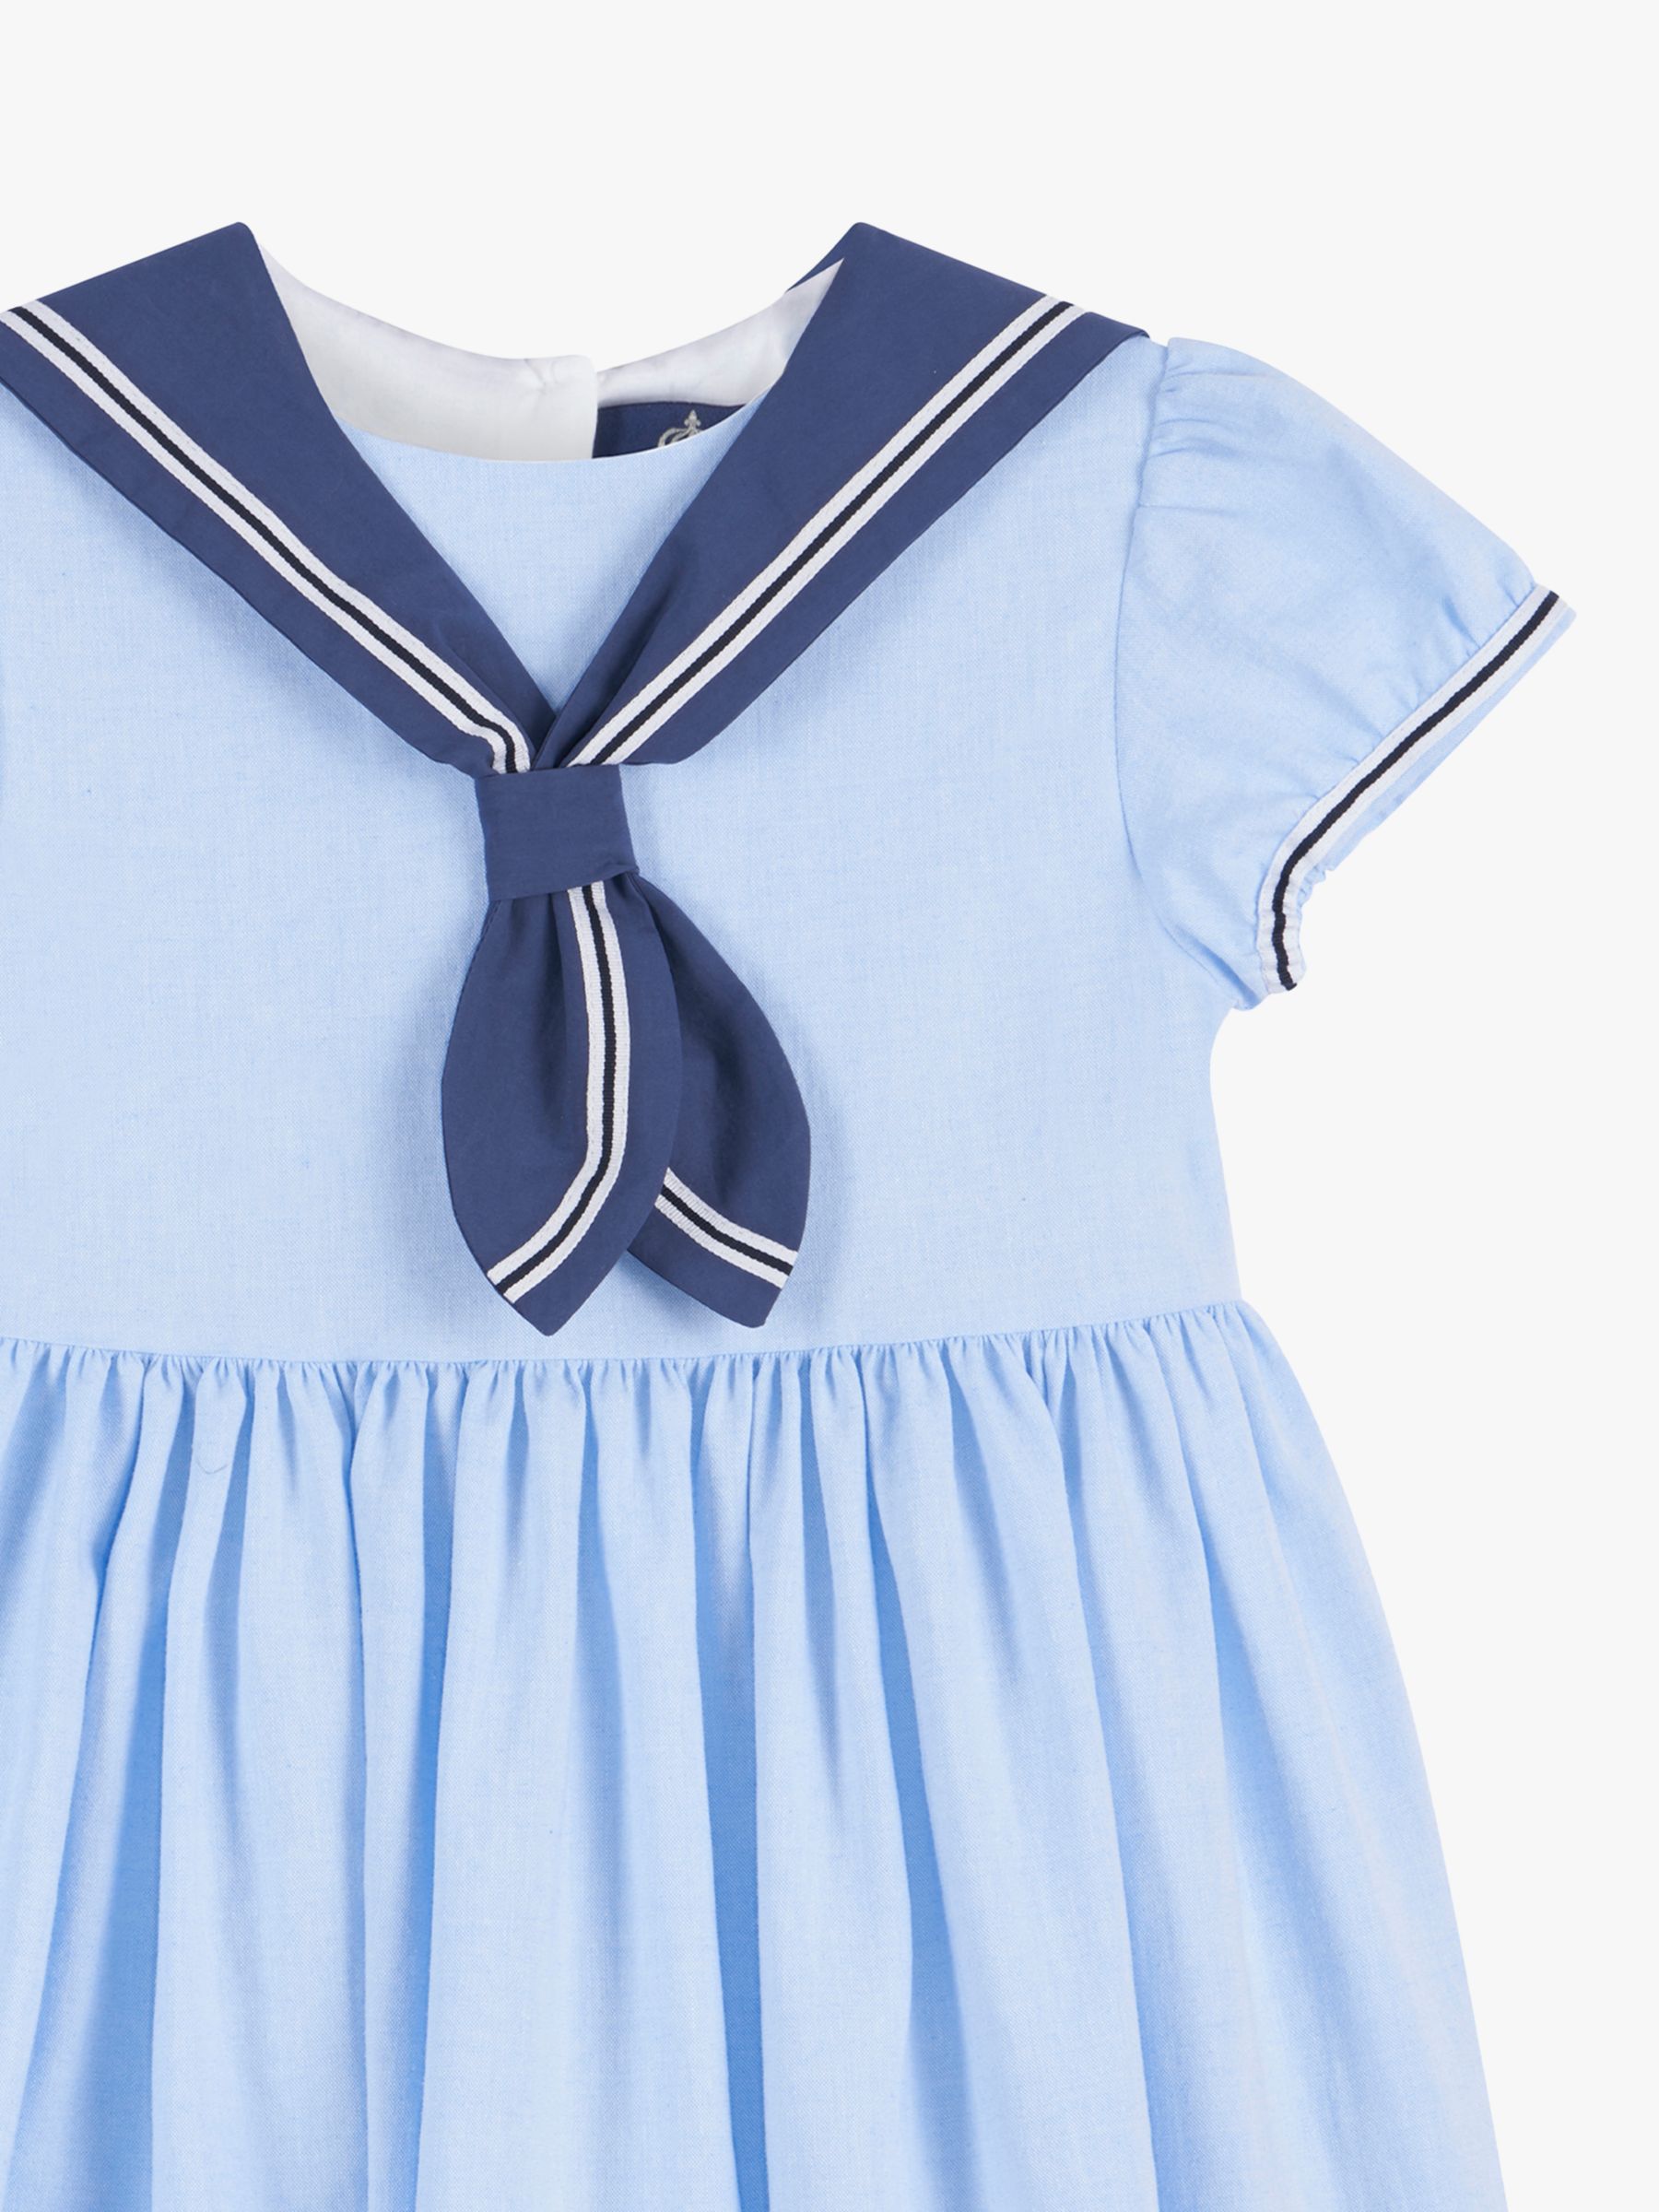 Buy Trotters Kids' Philippa Sailor Puff Sleeve Dress Online at johnlewis.com